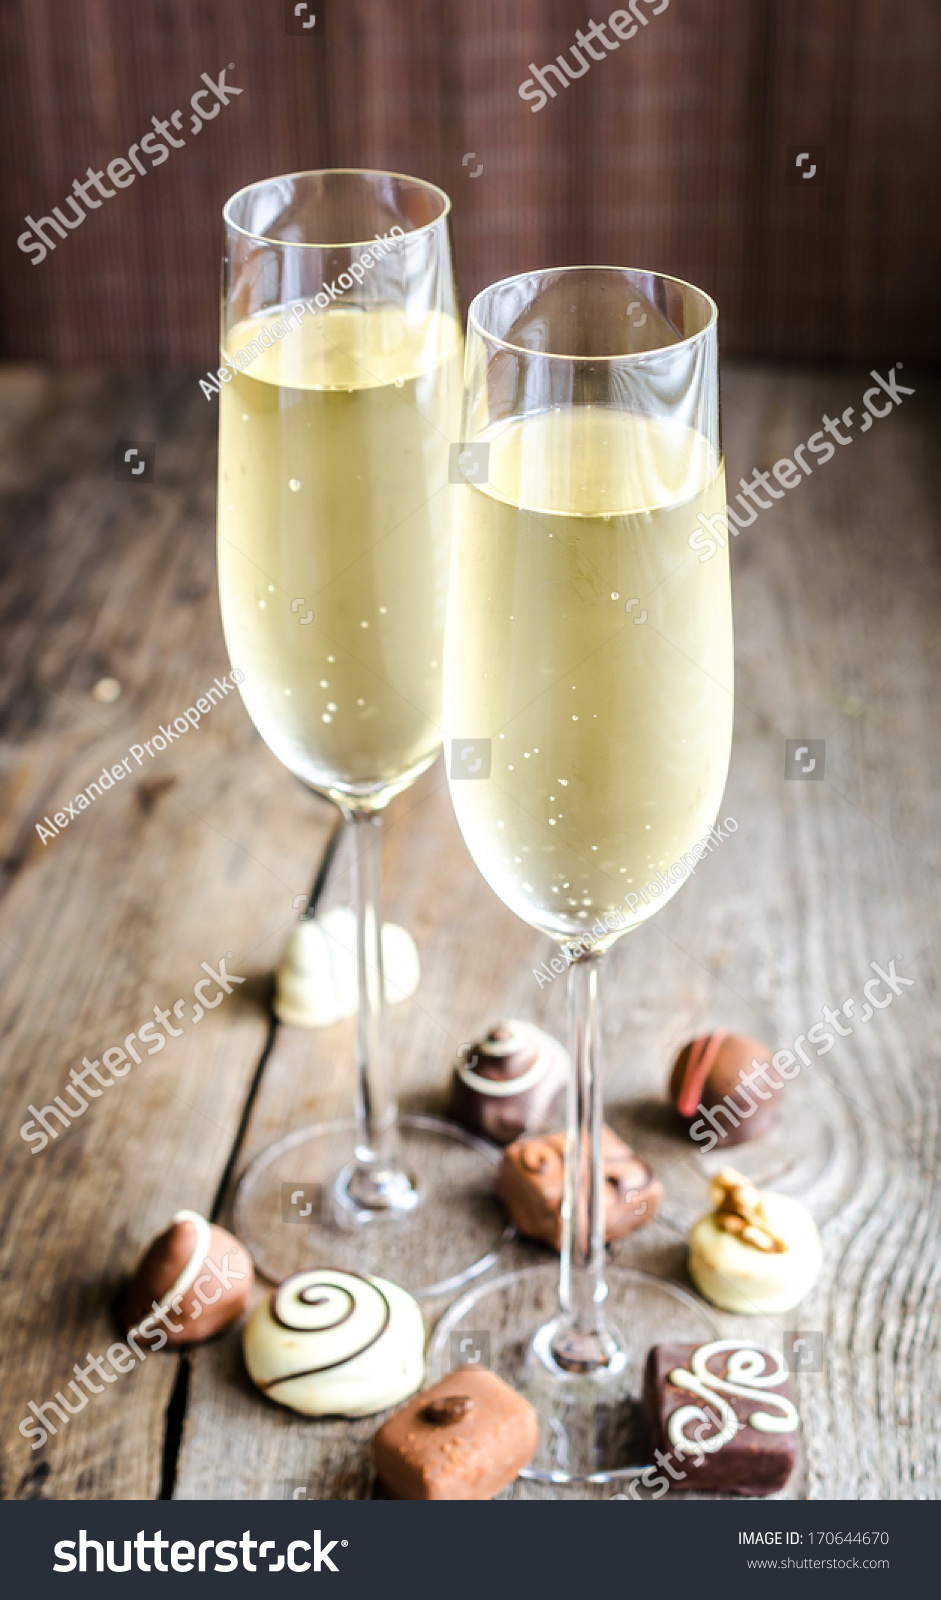 Two Glasses Of Champagne With Candies Stock Photo 170644670 : Shutterstock